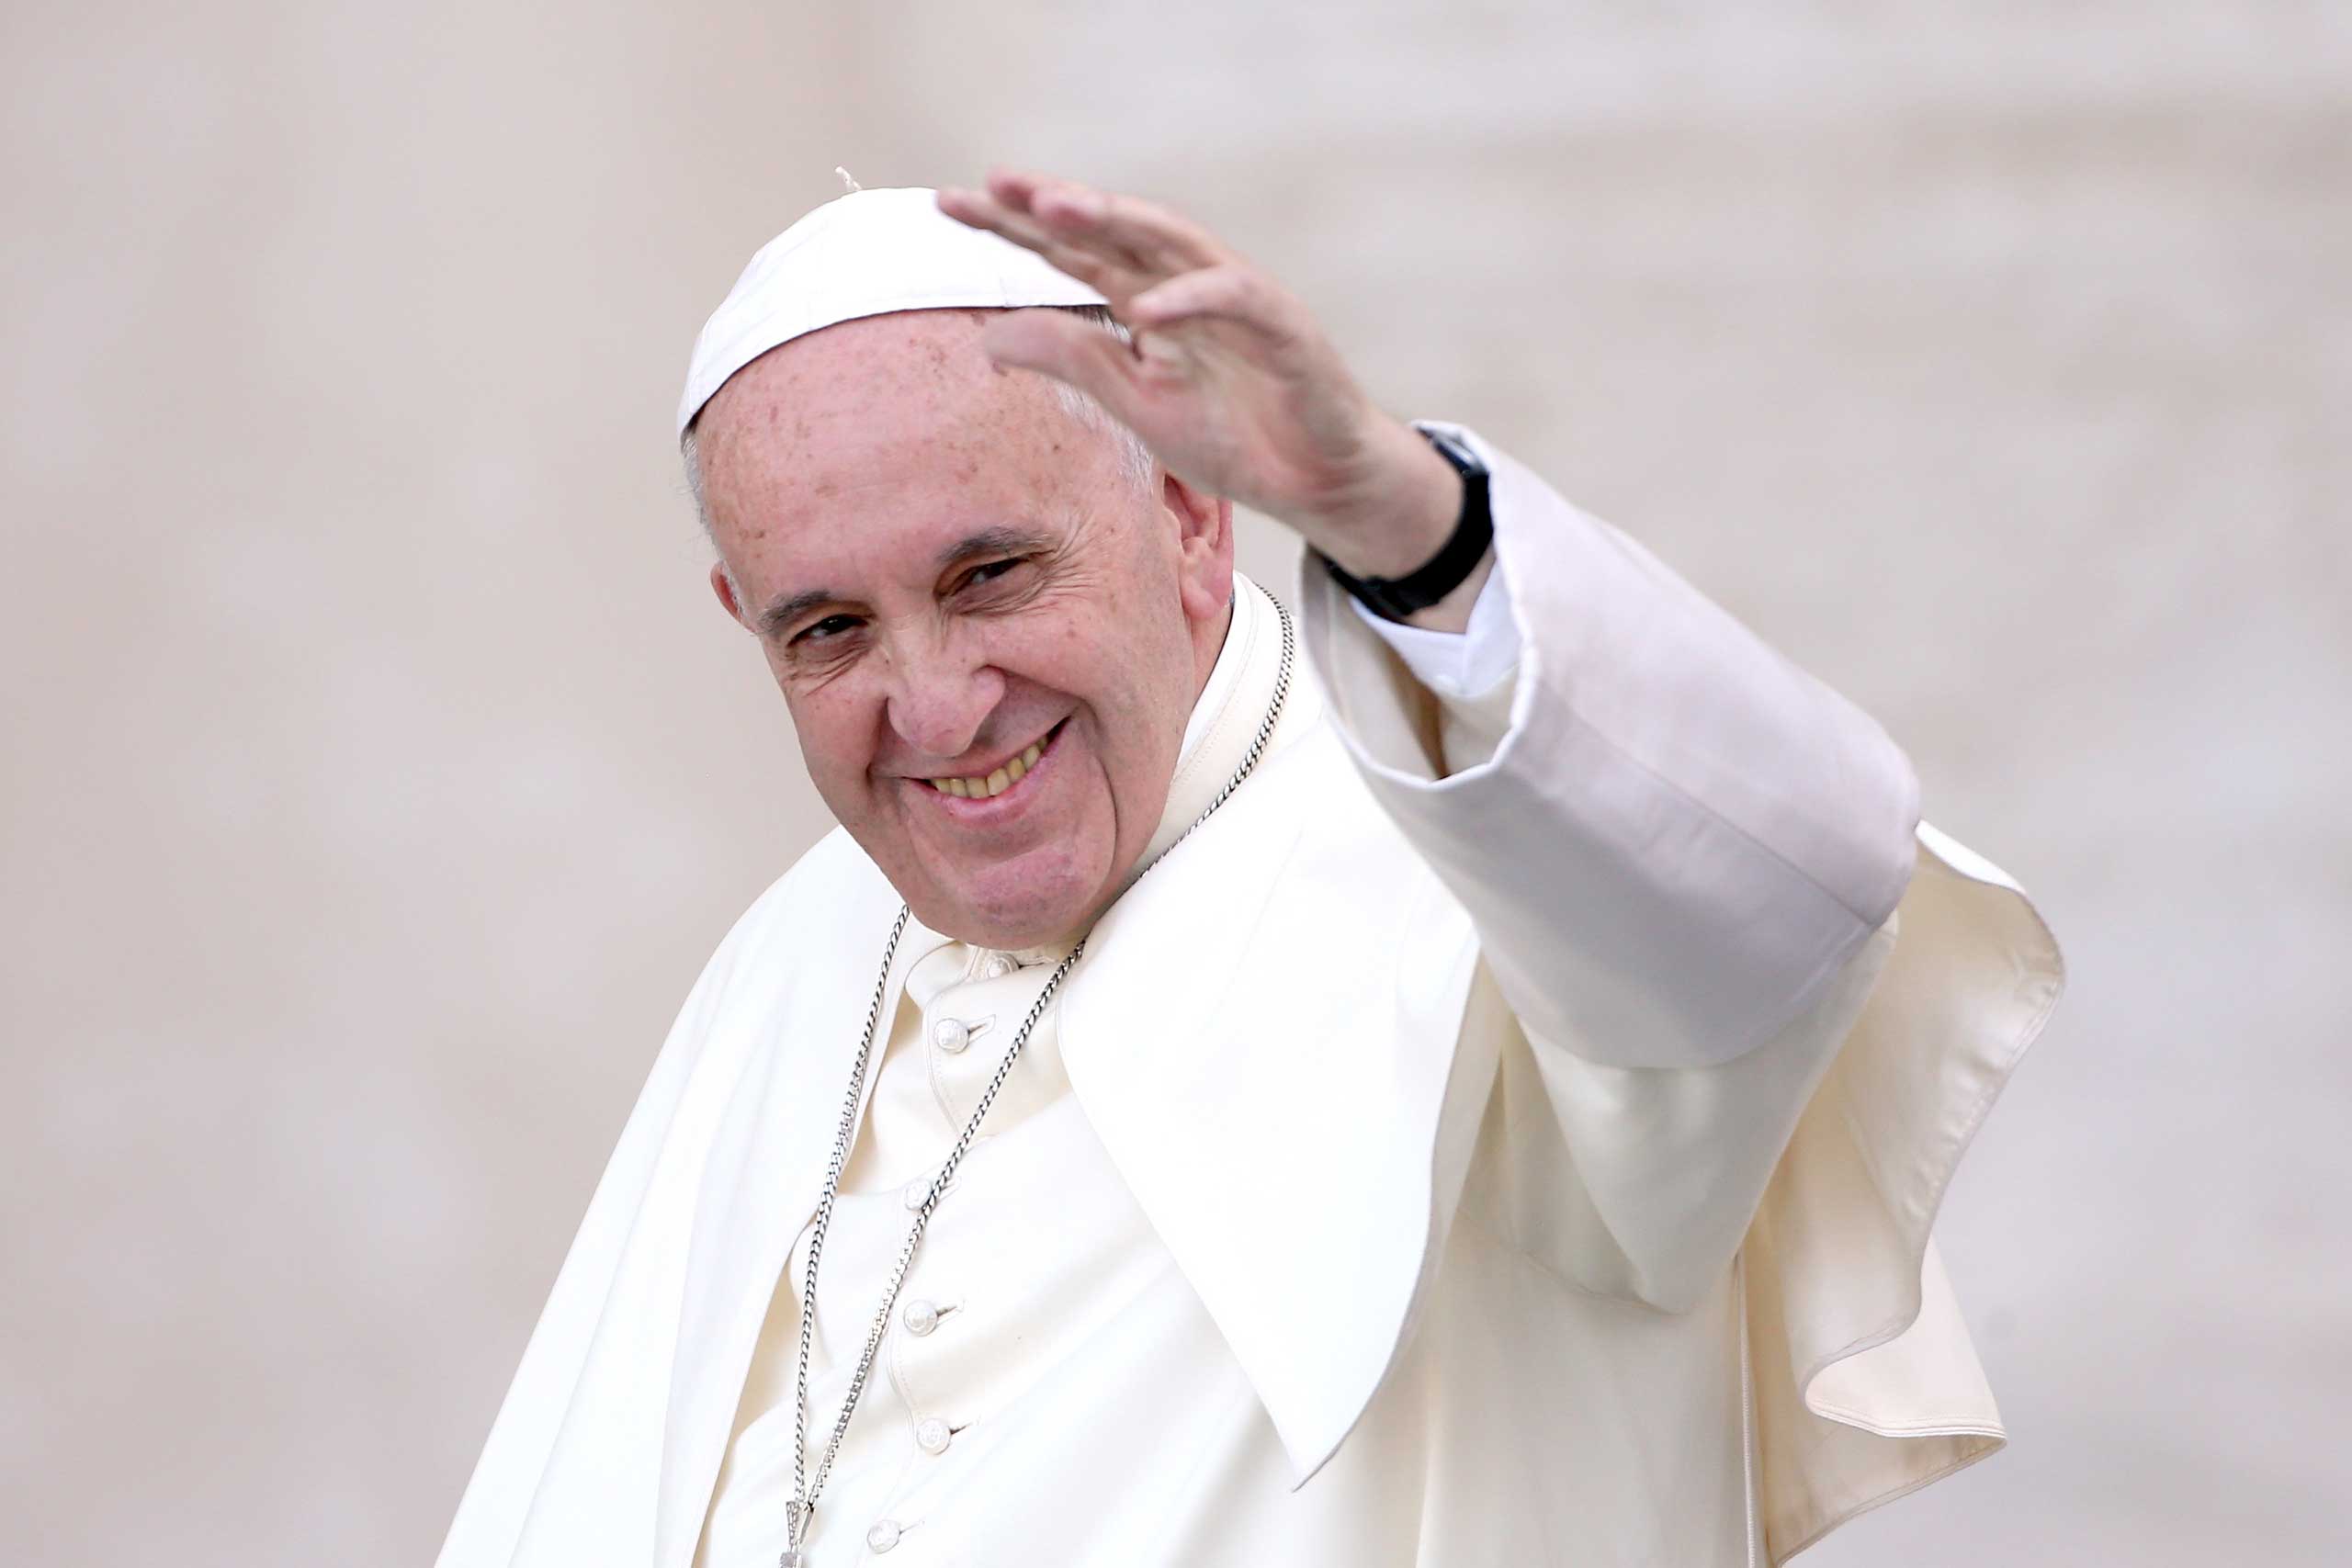 Pope Francis waves as he arrives in St. Peter's Square for an audience with thousands of altar servers from around Europe on August 4, 2015 in Vatican City, Vatican. (Franco Origlia—Getty Images)